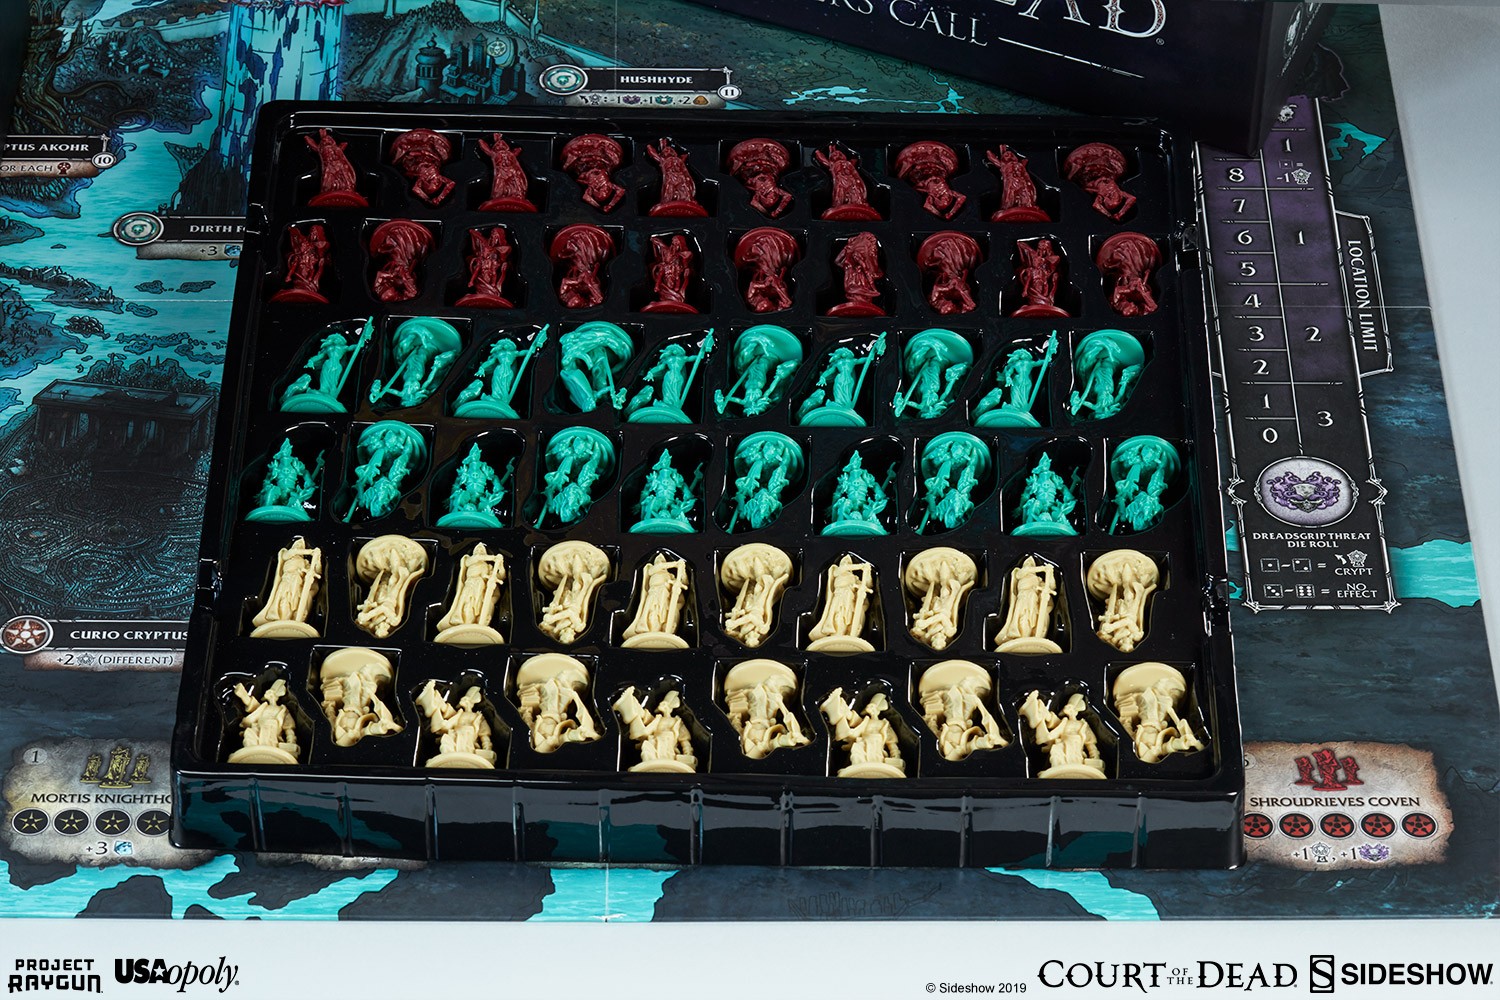 Court of the Dead Mourner's Call Game Exclusive Edition (Prototype Shown) View 8